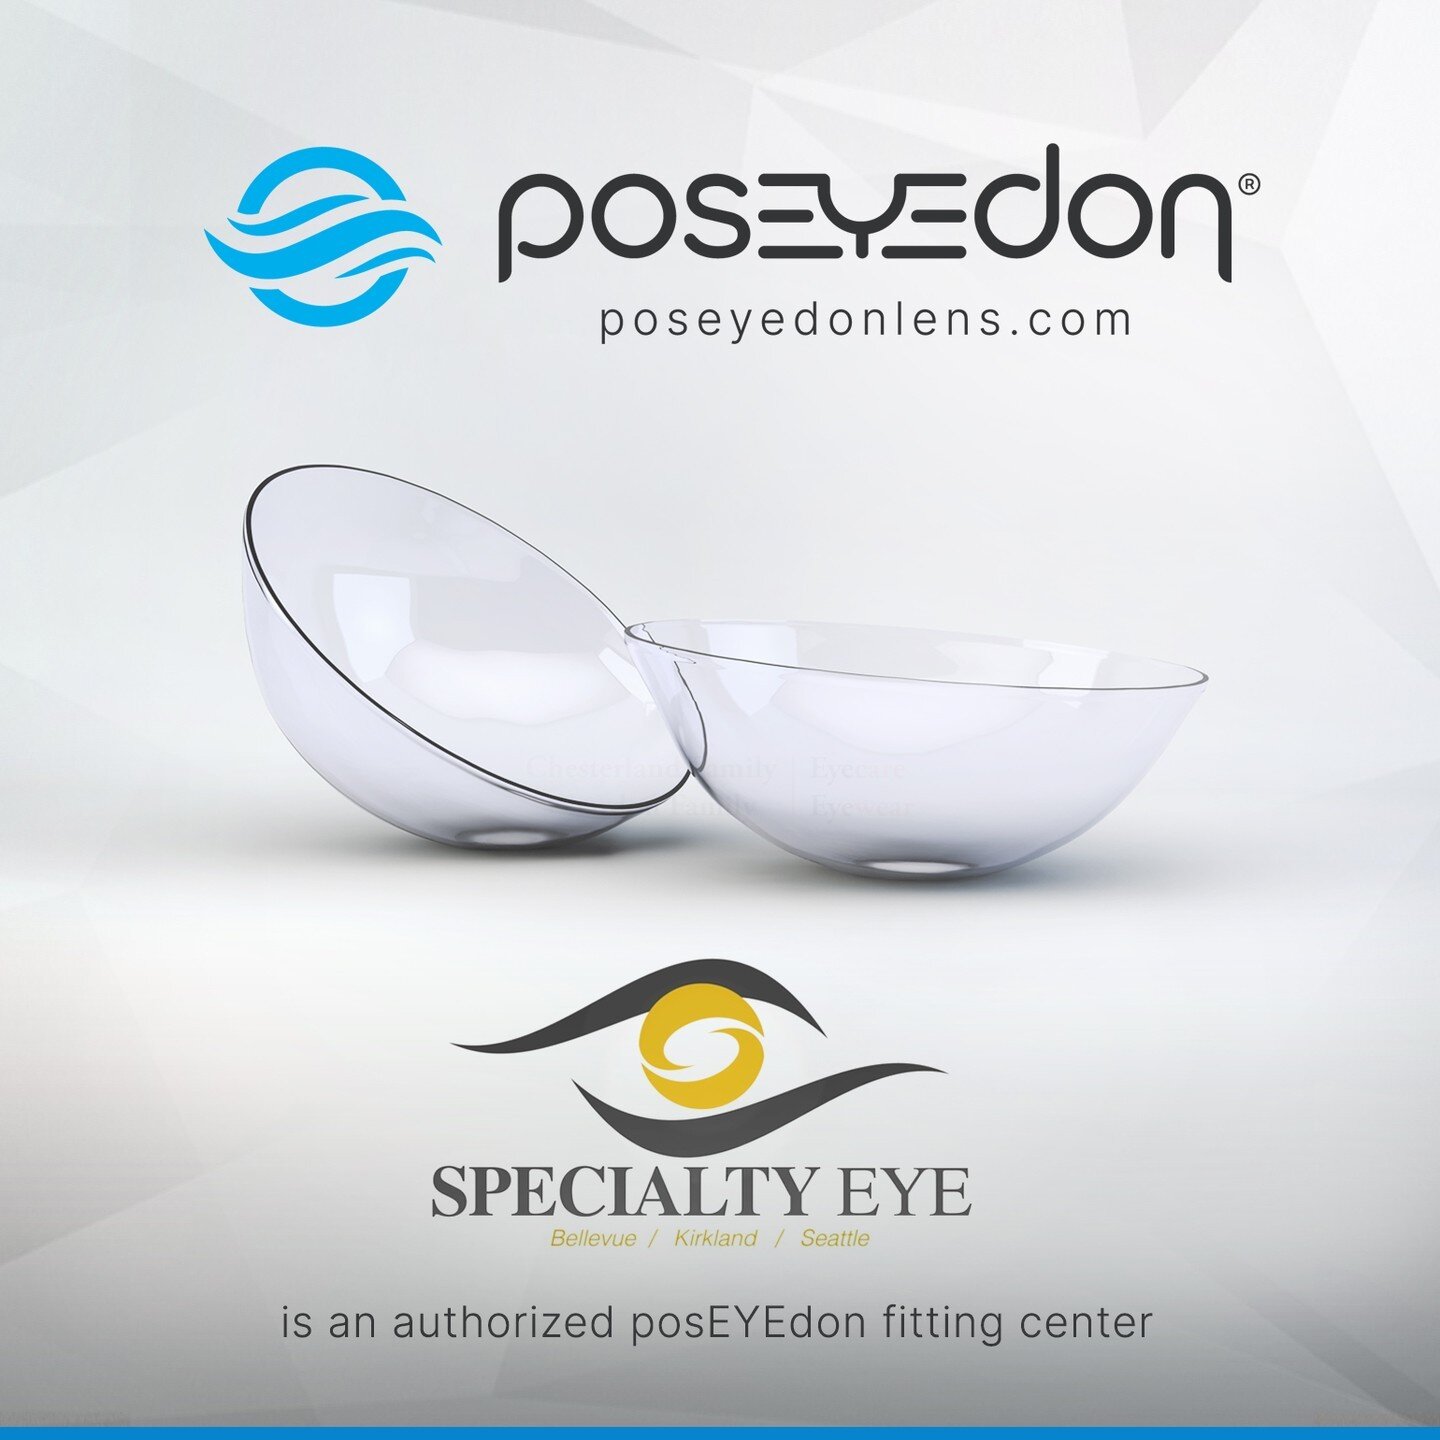 🟡 🟢 🔵 As a posEYEdon lens candidate, you will be expertly evaluated and fit by a licensed optometrist and certified posEYEdon lens provider. A lens will then be custom-made to fit the contour of your eyes and provide all-day comfort, vision and oc